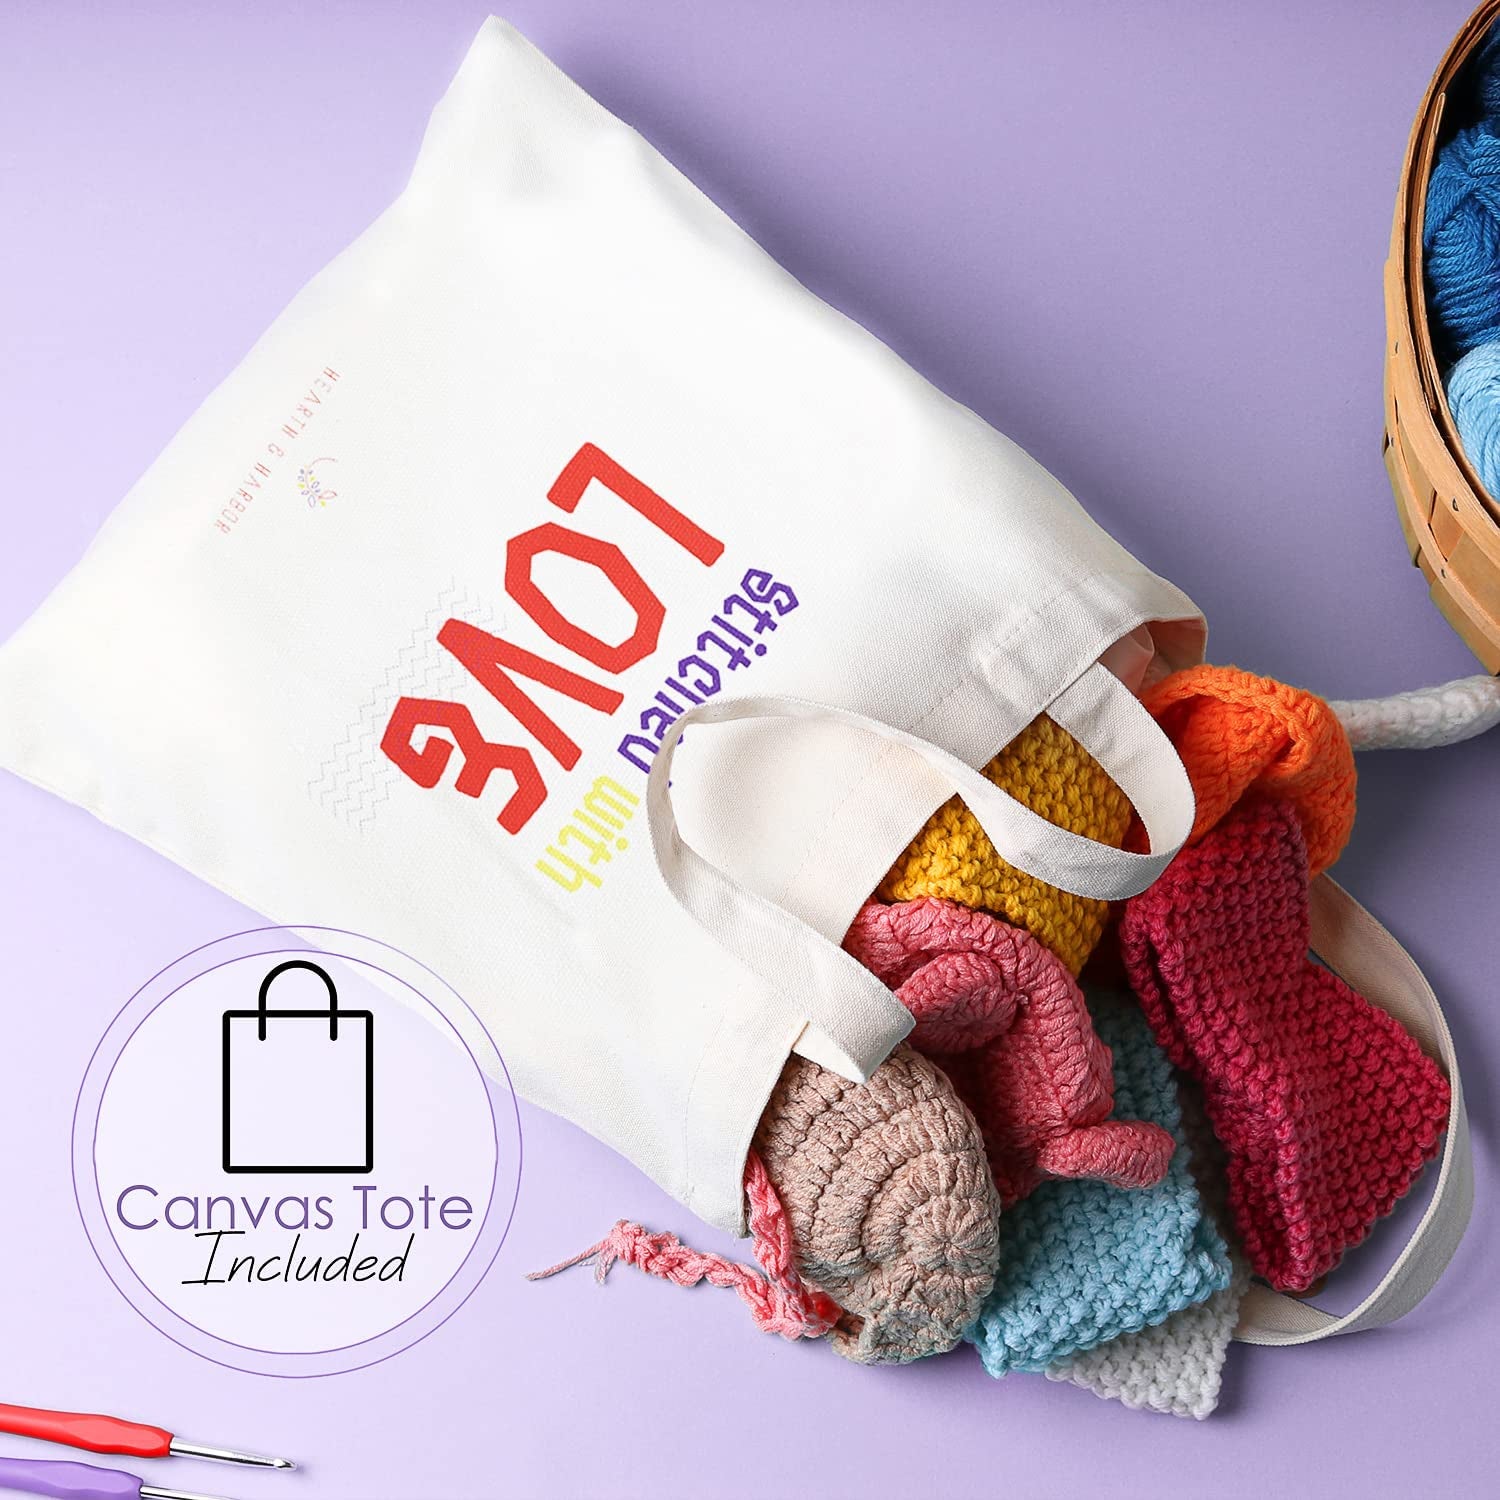 Crochet Kit for Beginners Adults, Crochet Kits for Beginner, Learn to Crochet Set, Crocheting Kit, 1500 Yards Crochet Yarn, Crochet Hook Set, Crochet Accessories and Supplies